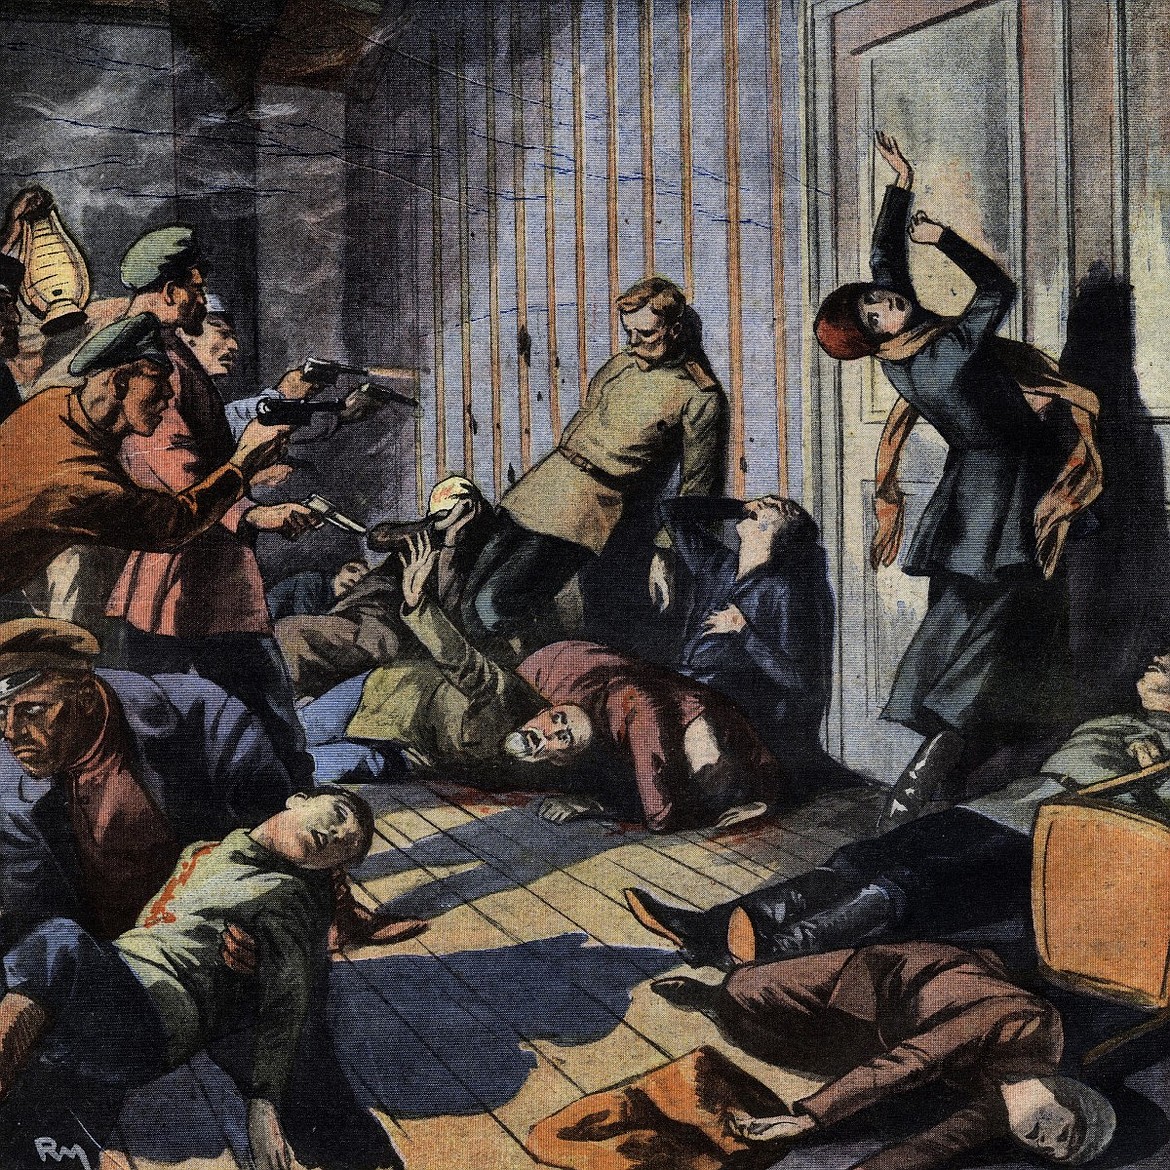 Front page of French newspaper Le Petit Journal Illustre in 1926, depicting massacre of Czar Nicolas II of Russia and his family and servants by Bolsheviks in the half-basement room of Ipatiev House in Yekaterinburg on July 17, 1918.